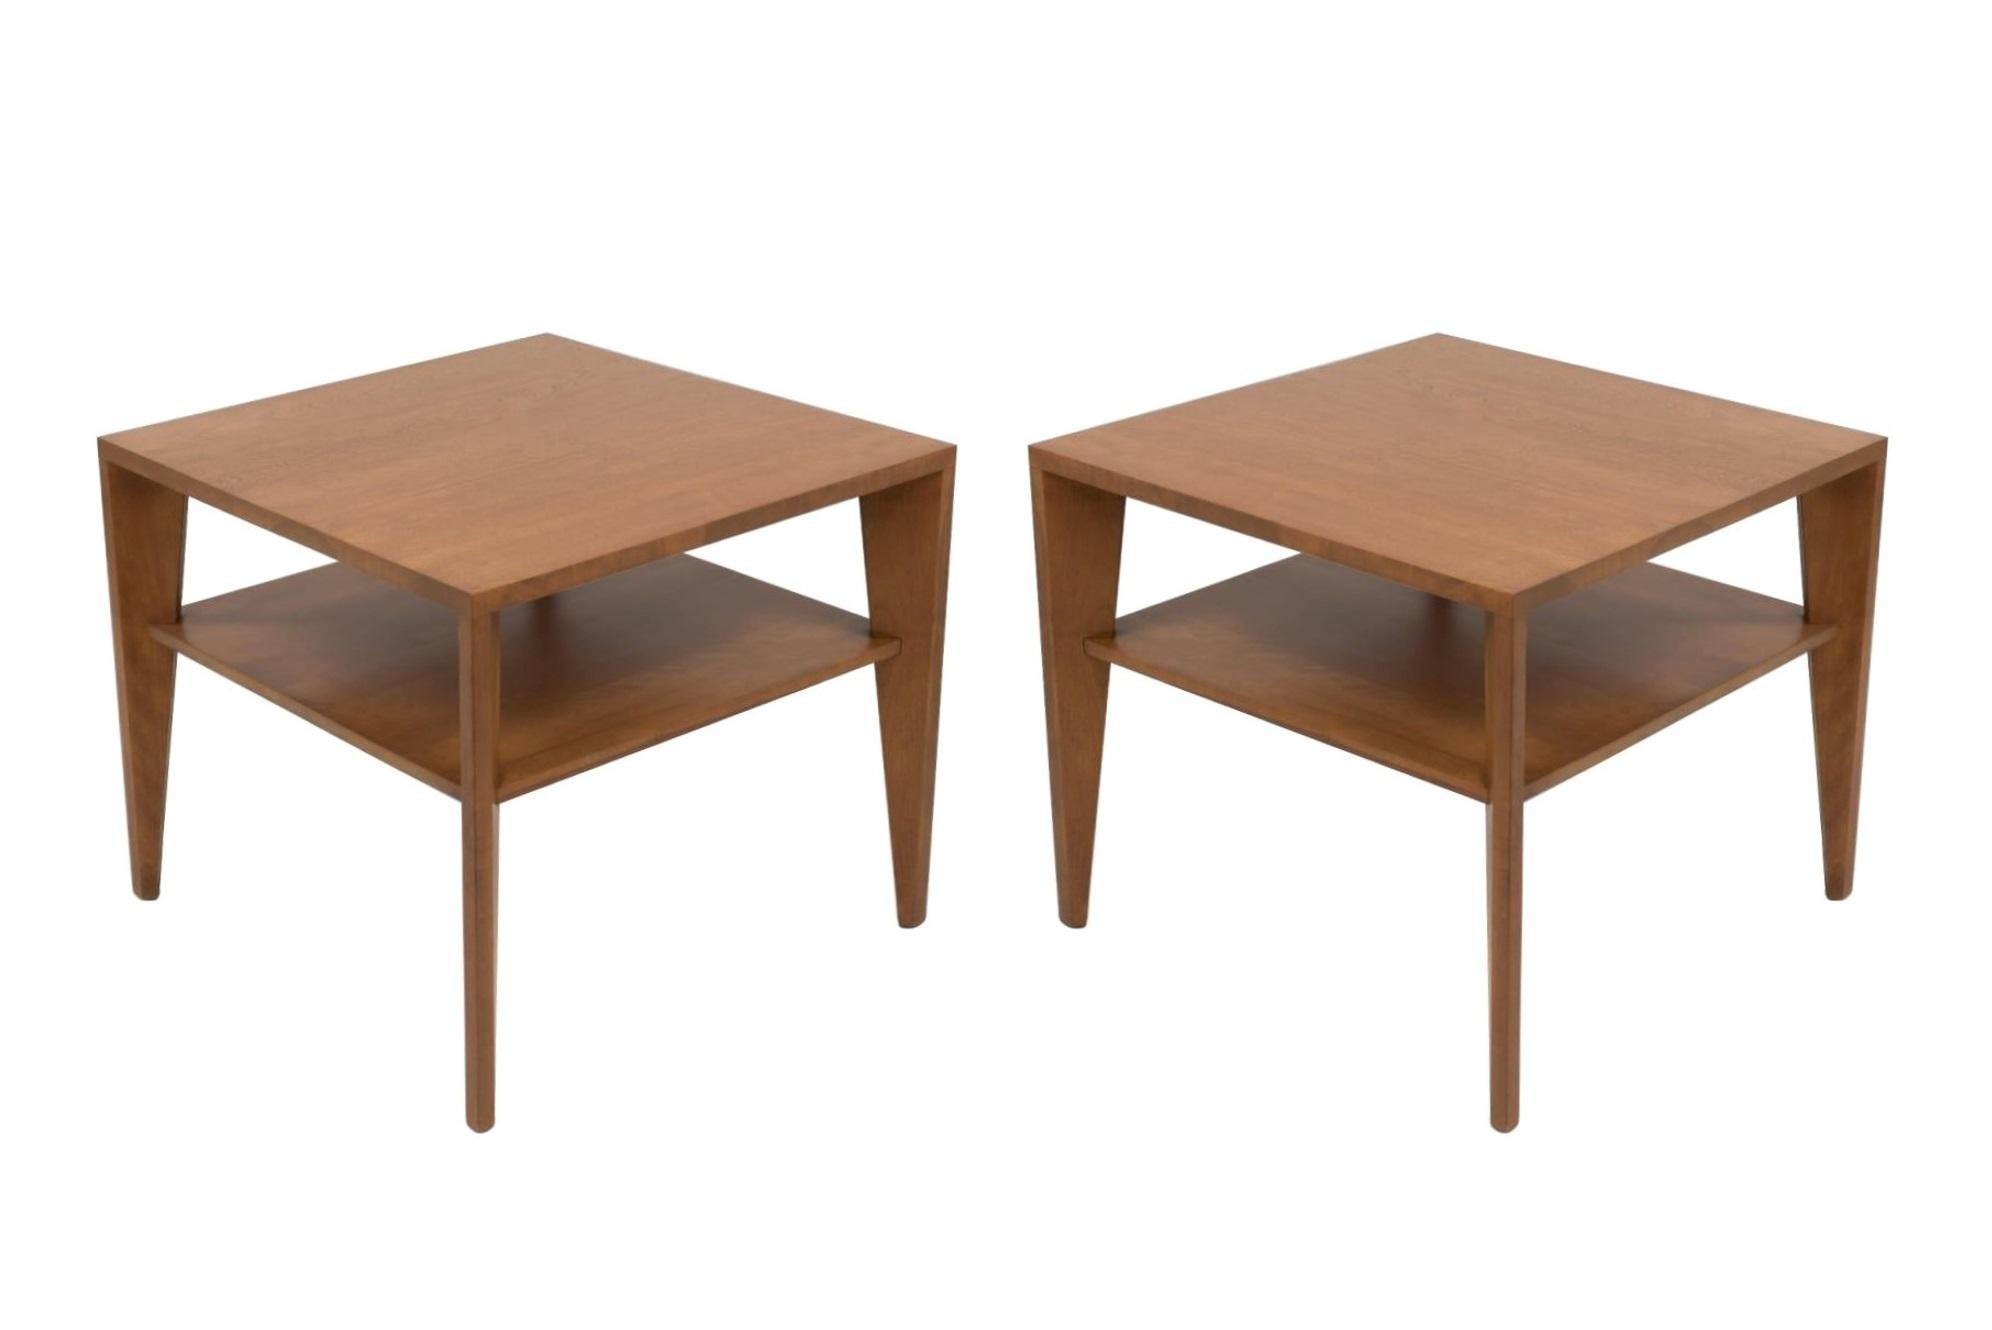 This stylish pair of Mid Century Modern side or end tables designed by Russel Wright. Part of the widely popular 